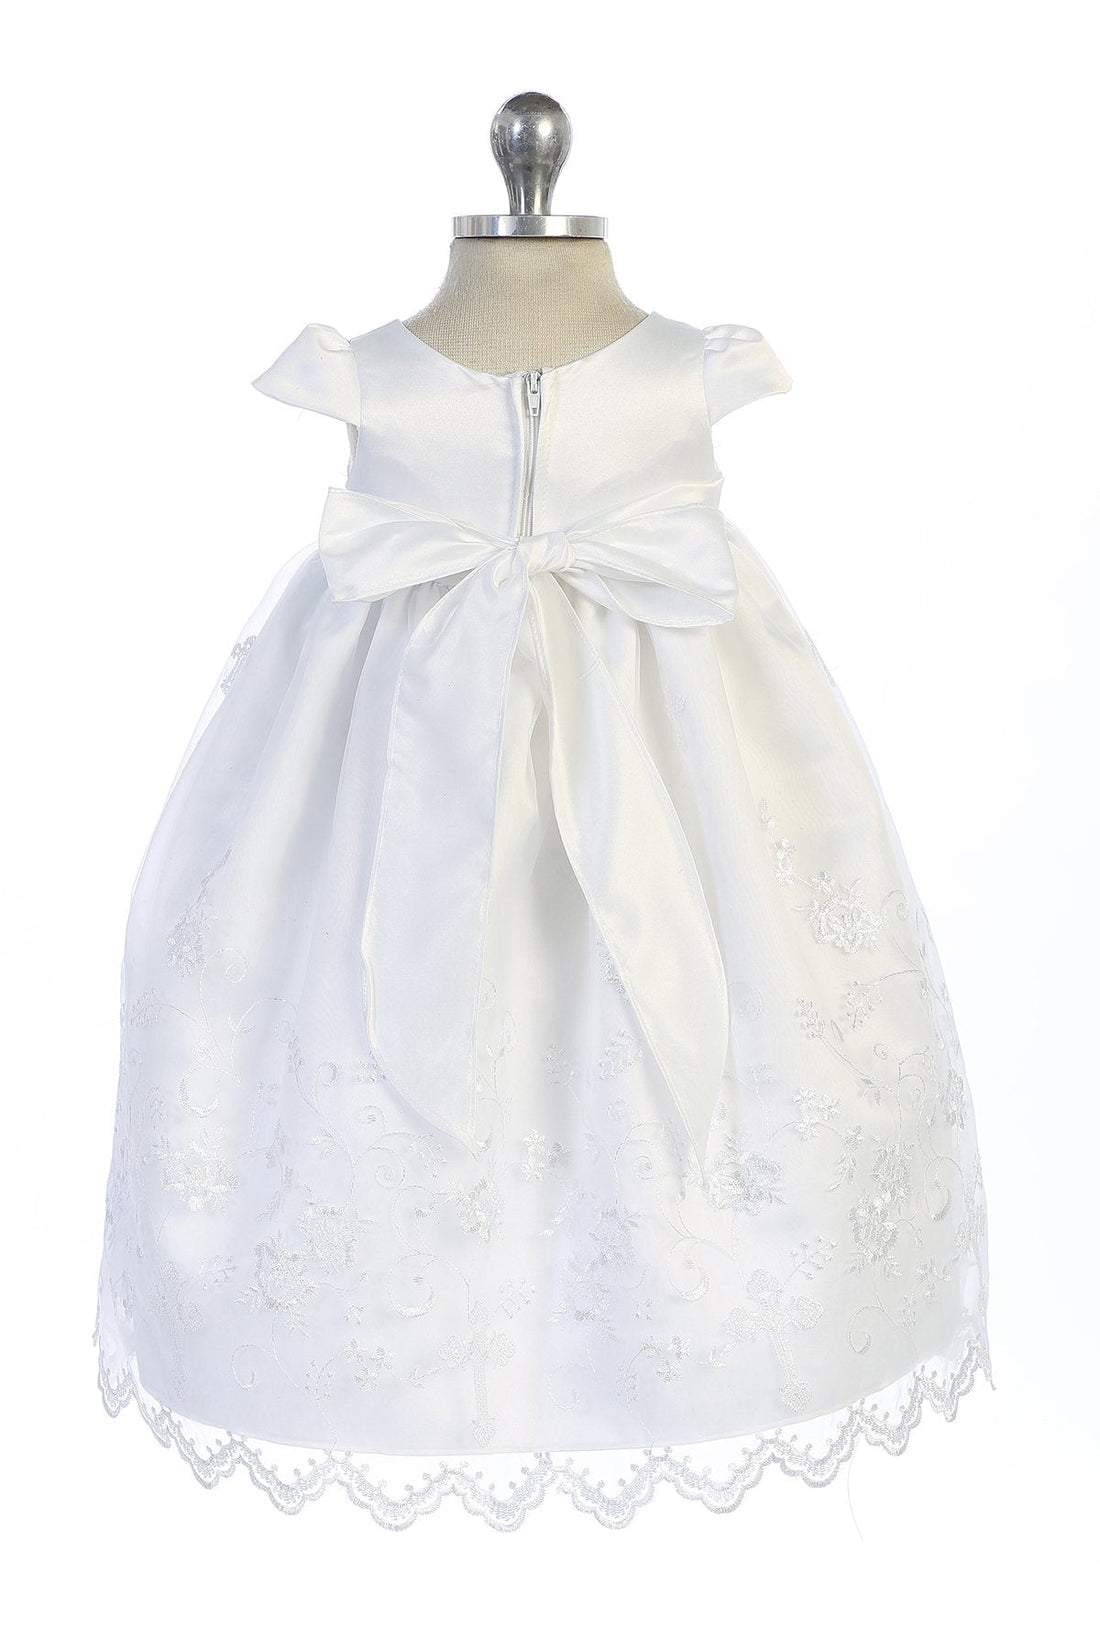 White_2 Baby Embroidered Christening Gown Dress-AS470